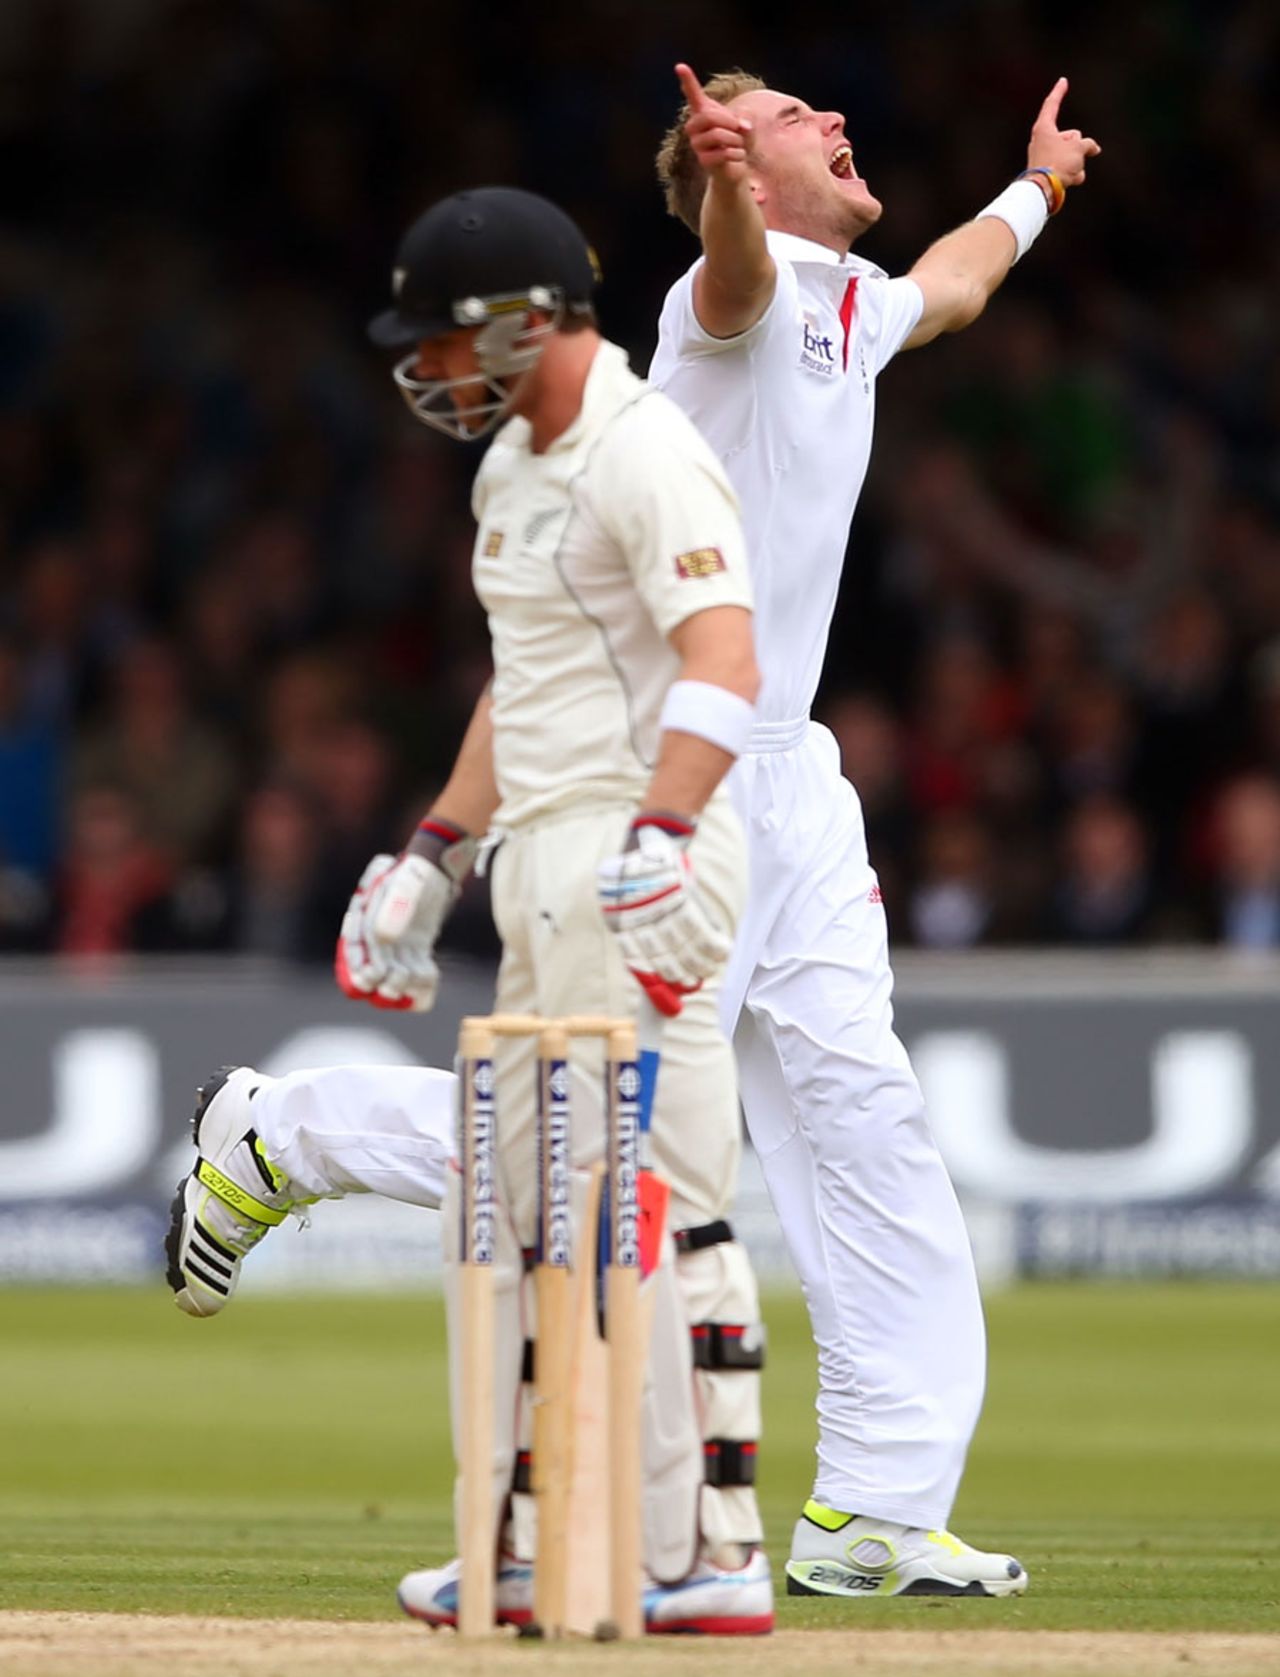 Stuart Broad's dismissal of Brendon McCullum was a major blow, England v New Zealand, 1st Investec Test, Lord's, 4th day, May 19, 2013